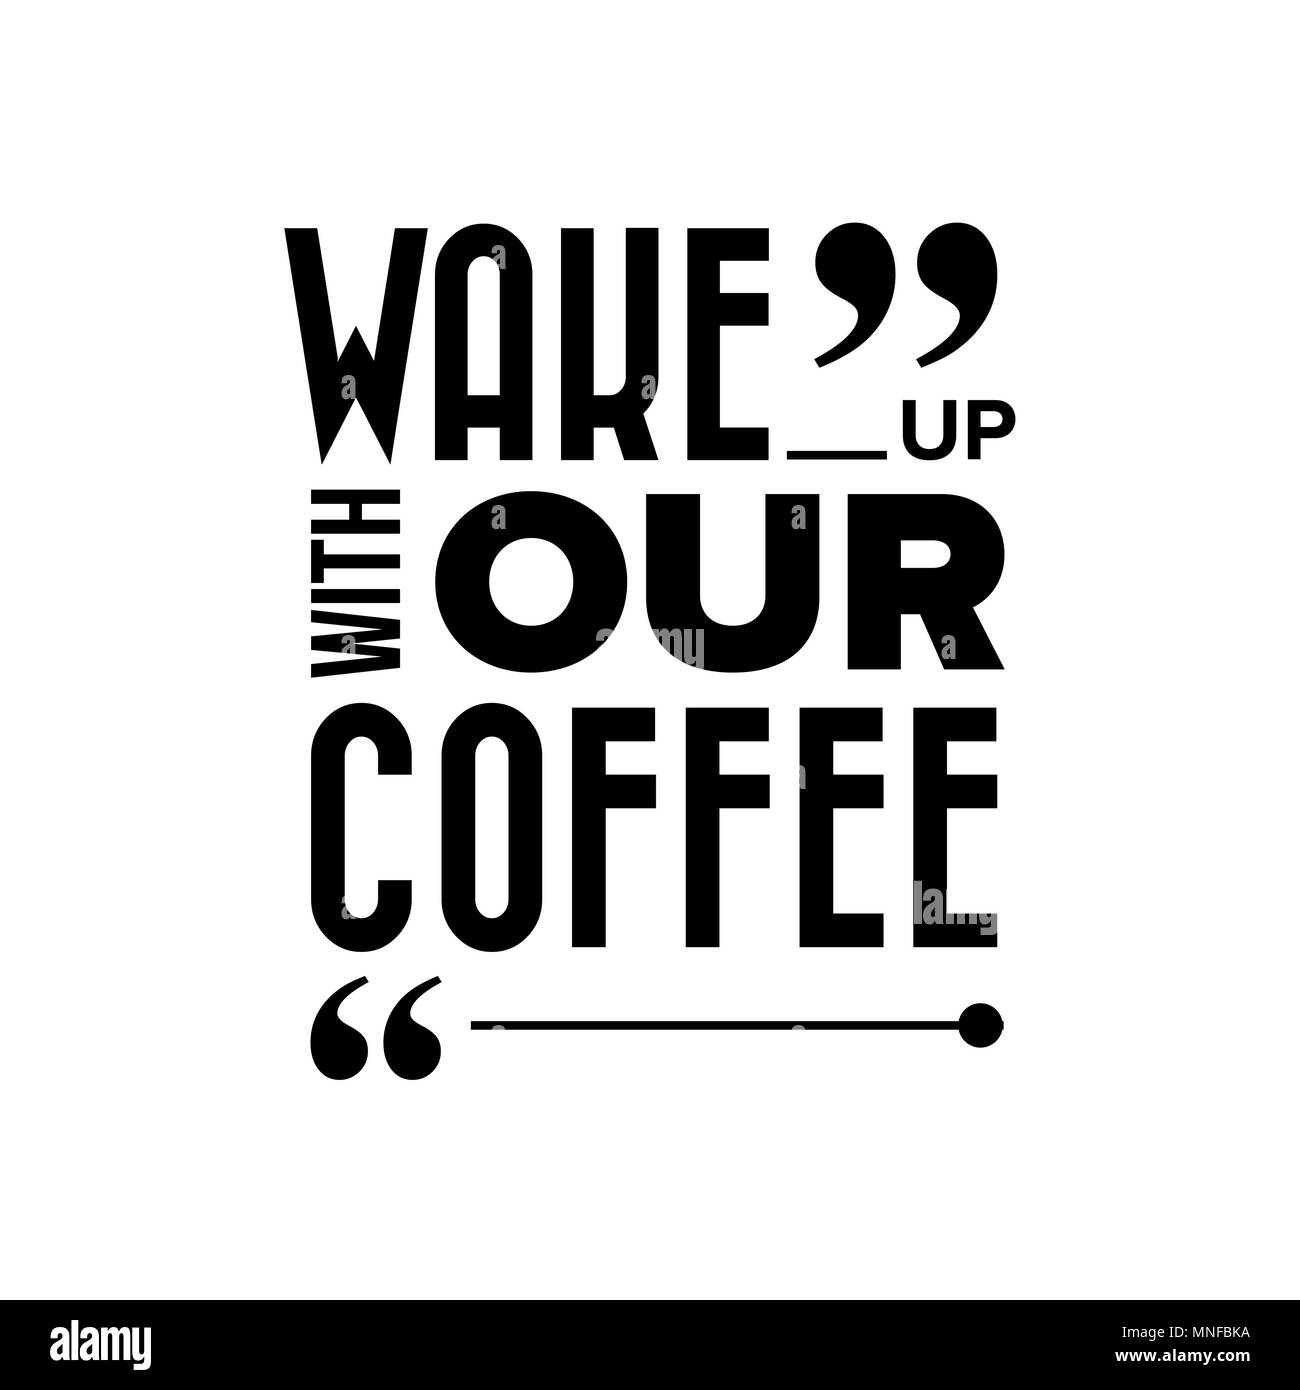 Wake up with our coffee Stock Vector